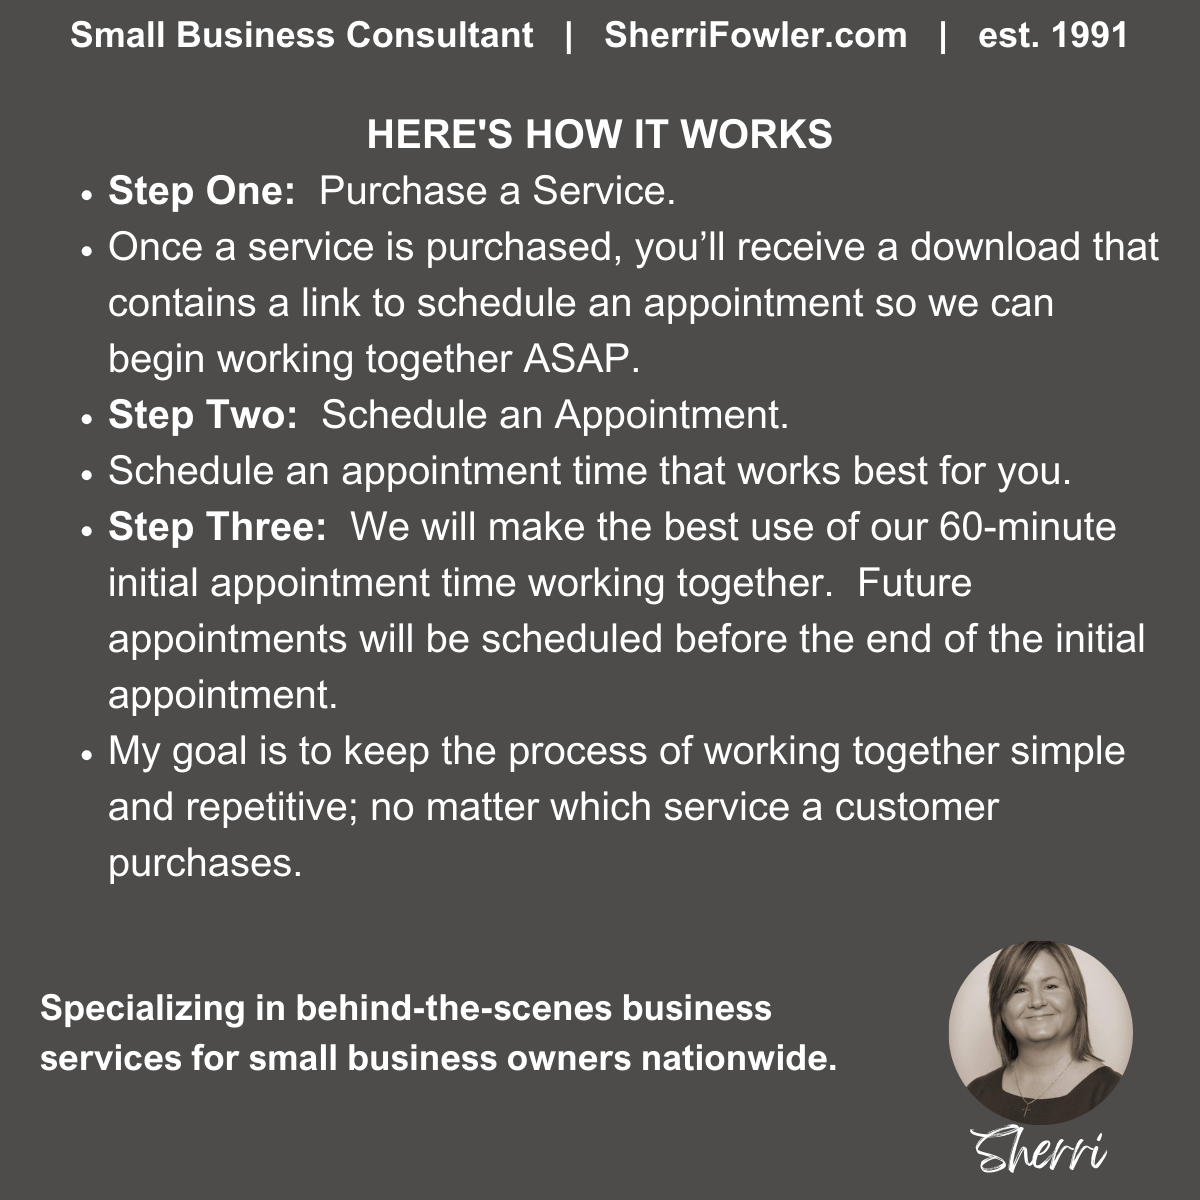 Race Card Design, Creation, and Copywriting or Content writing available for small business owners and nonprofits through SherriFowler.com